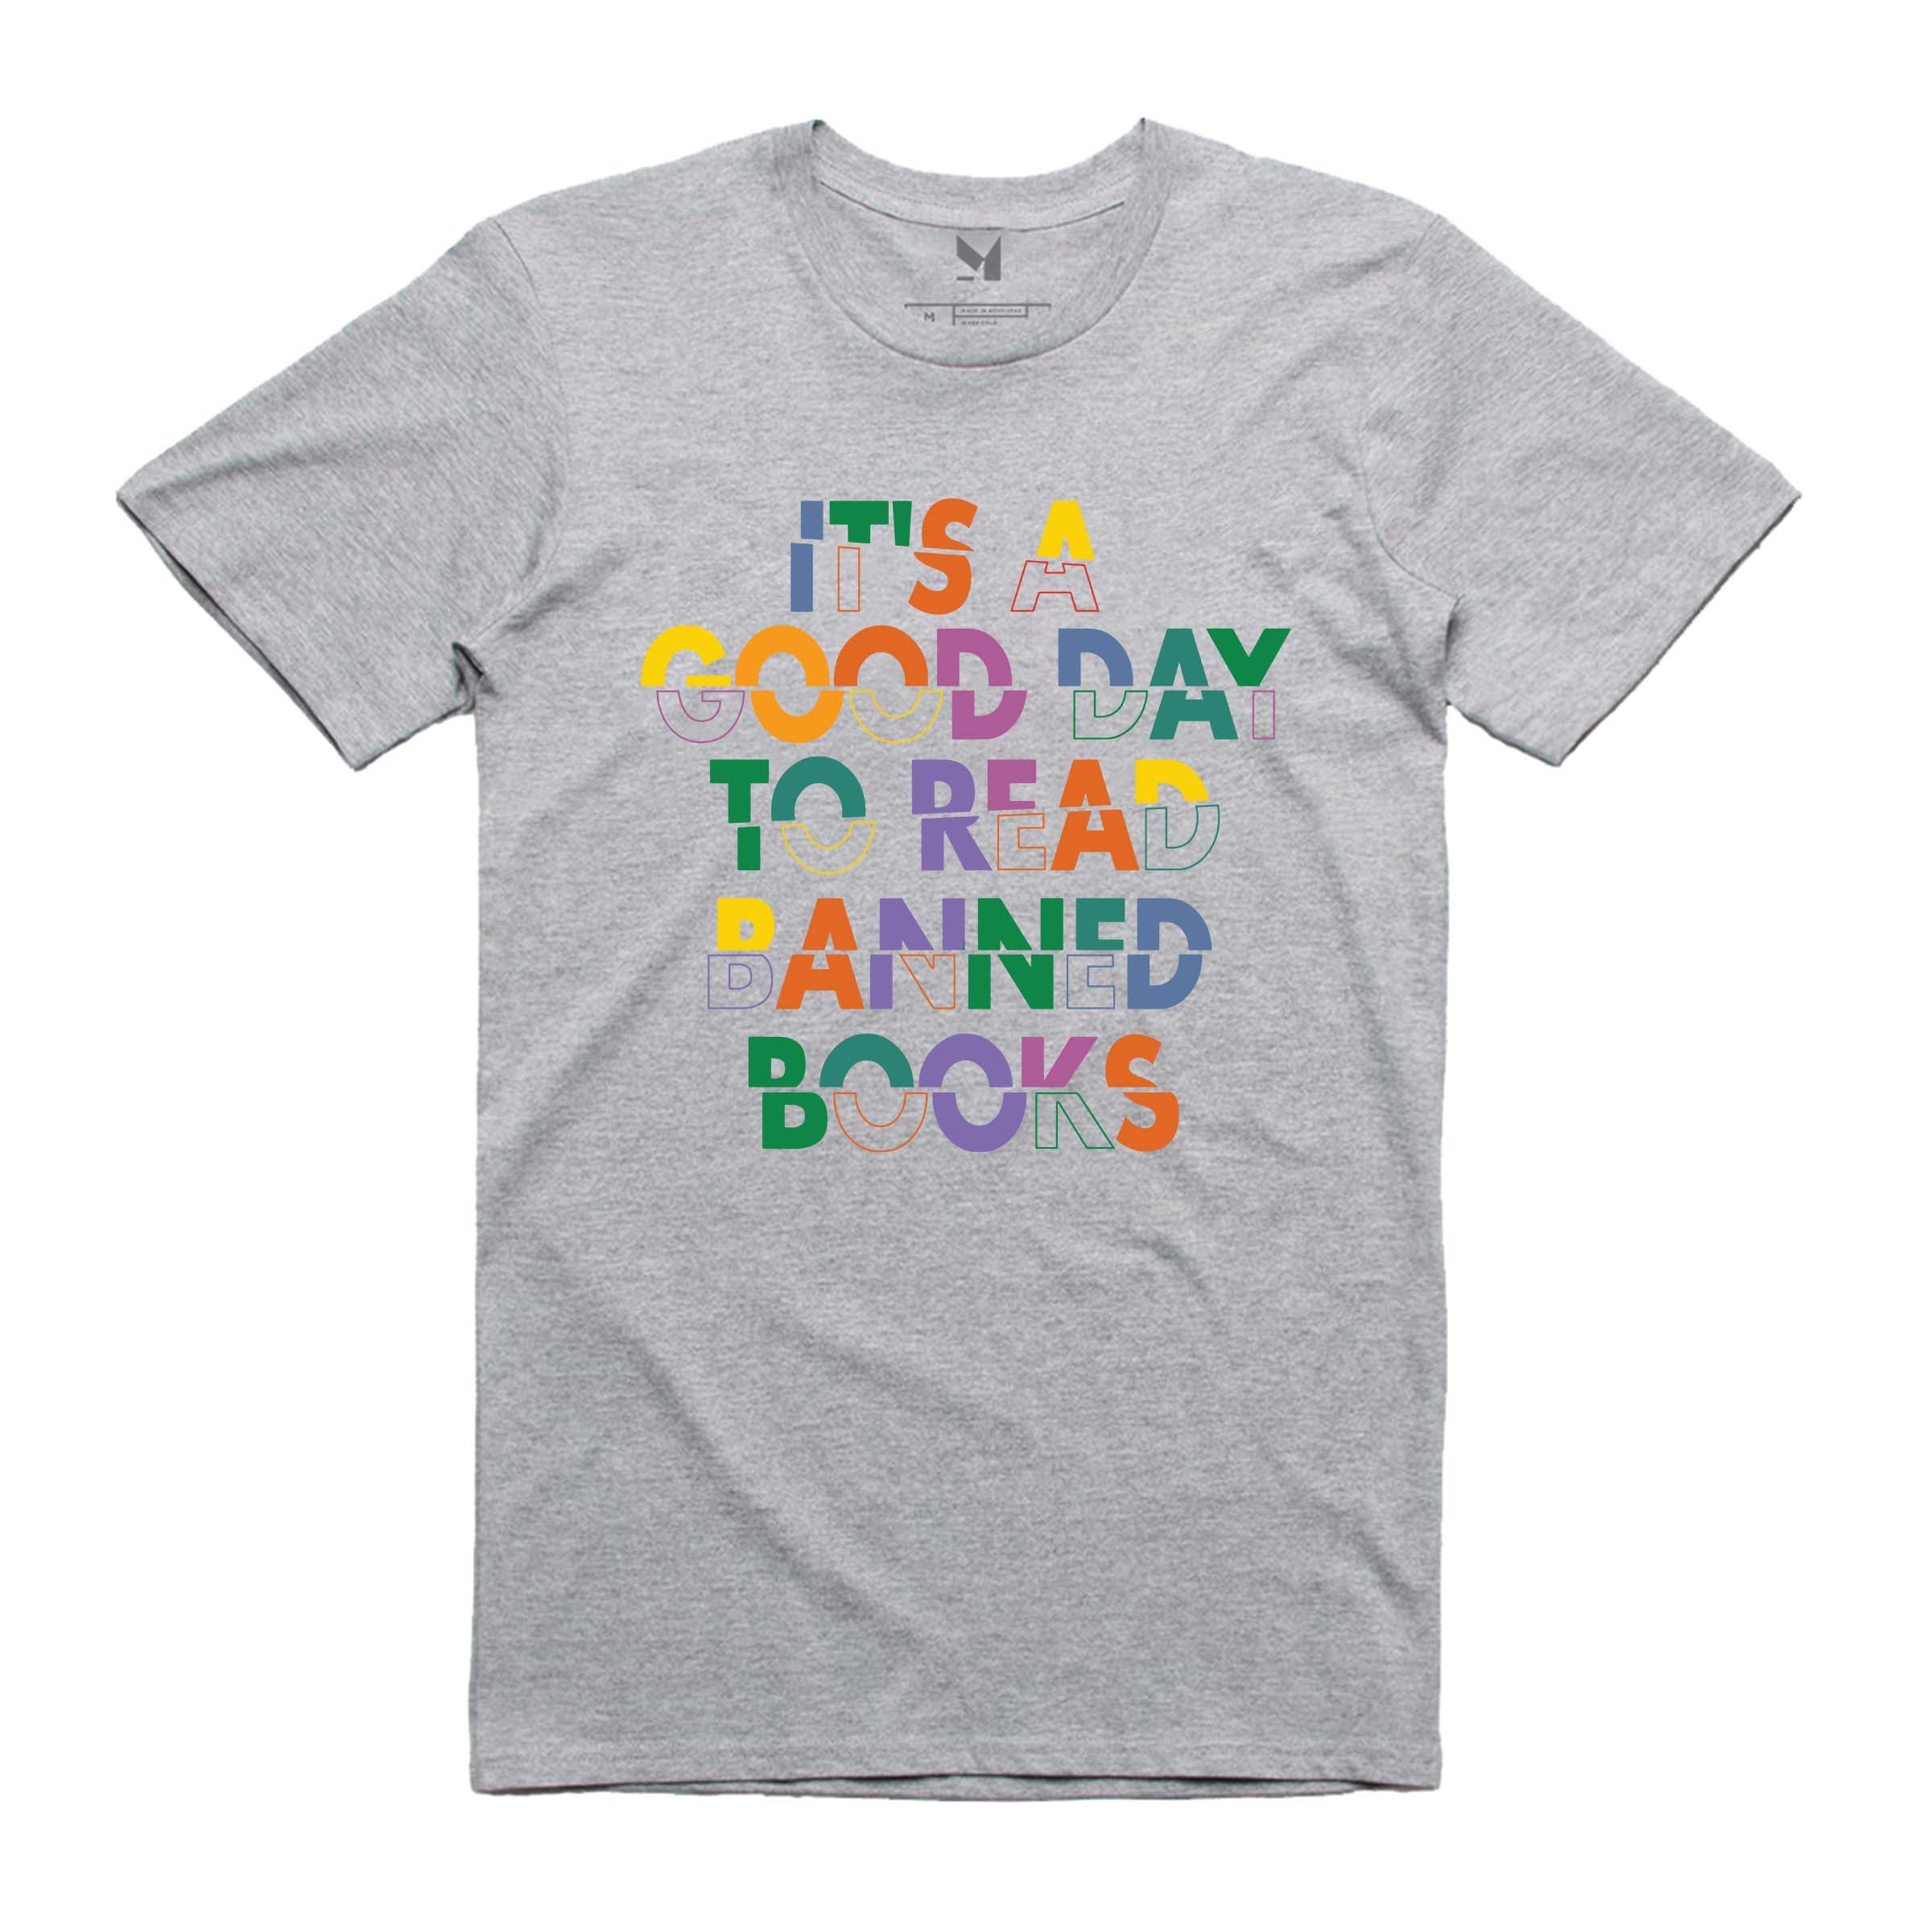 GOOD DAY T0 READ BANNED BOOKS T-SHIRT A005